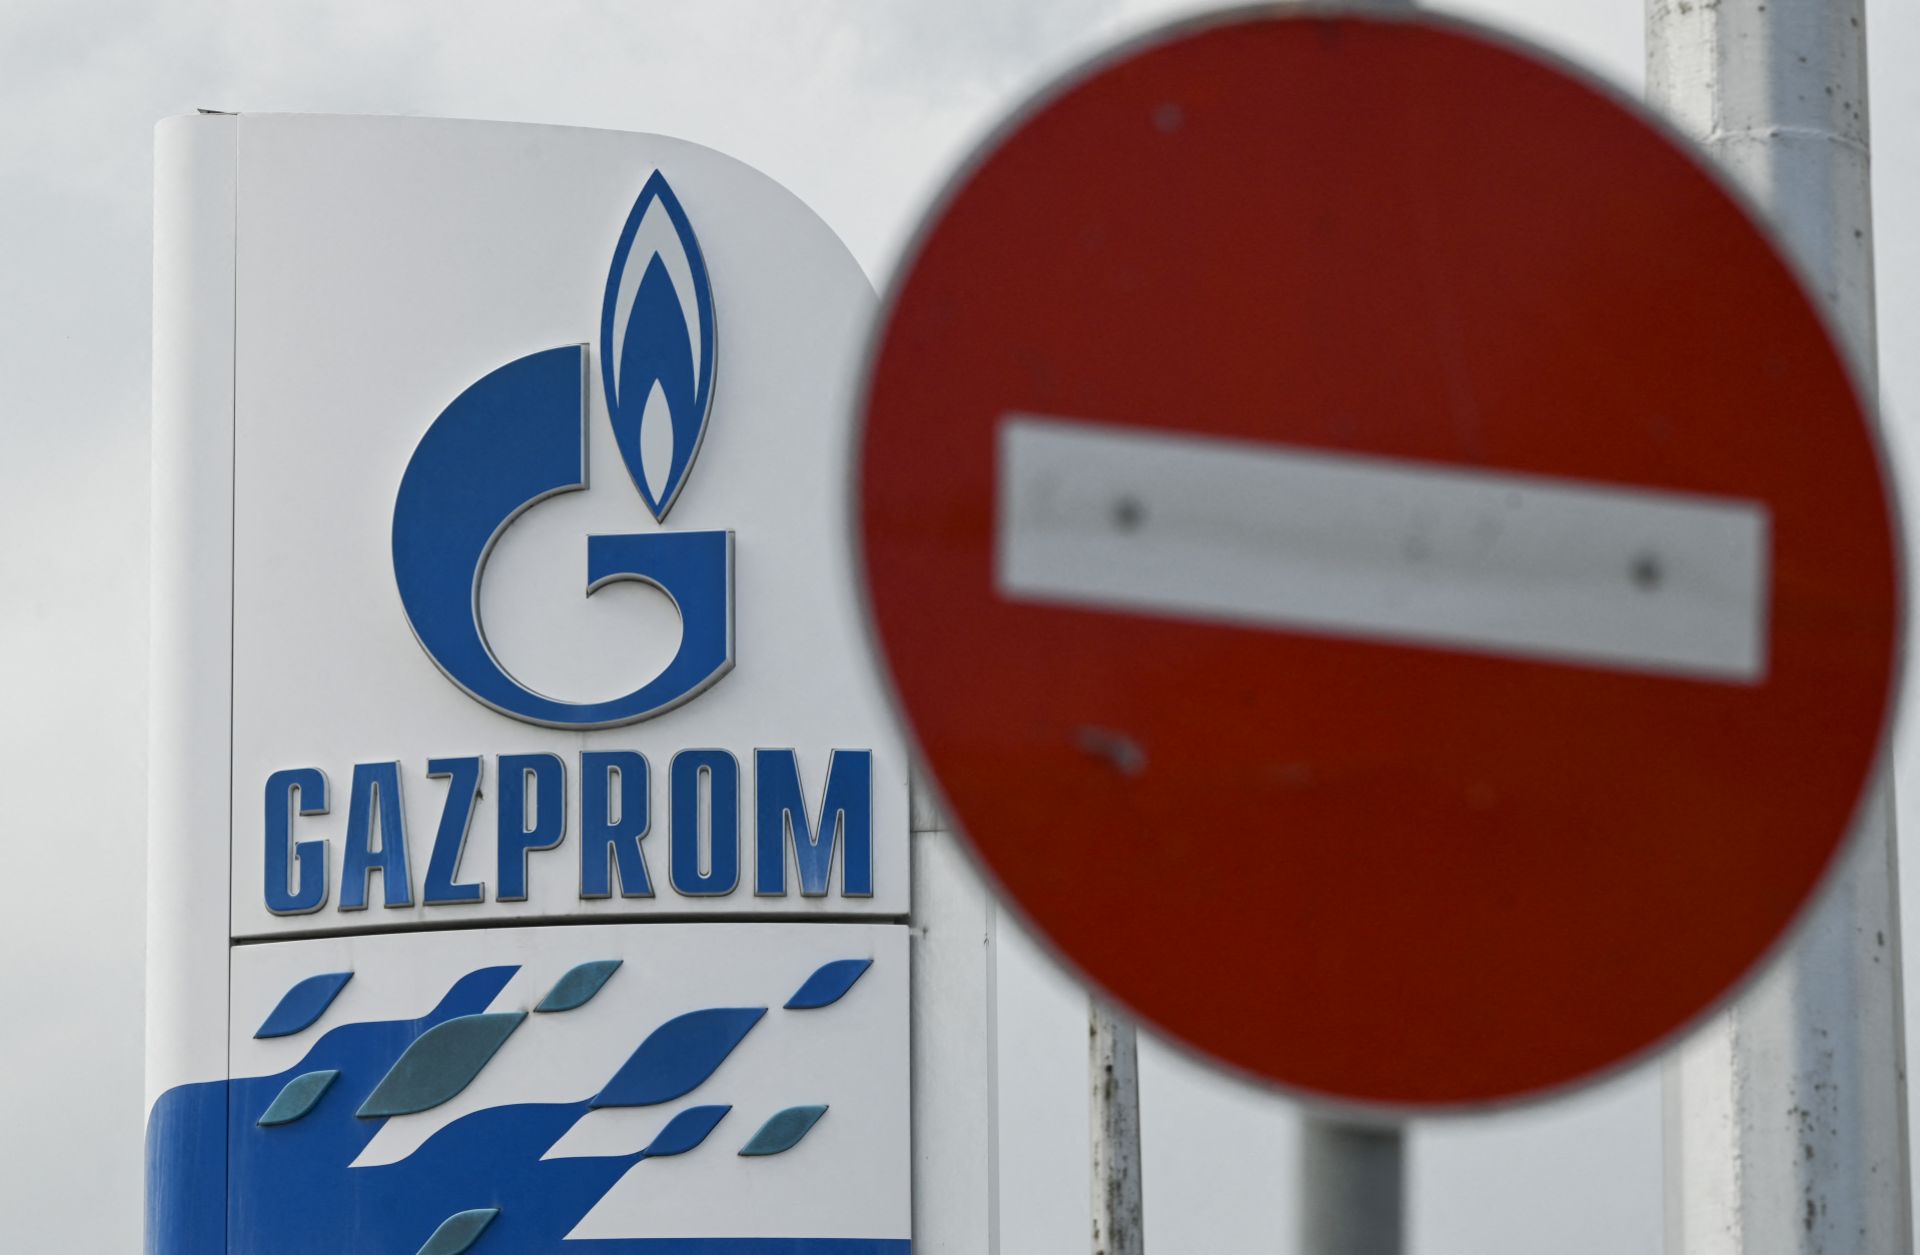 The logo of Russia's energy giant Gazprom is seen at a gas station in Sofia, Bulgaria, on April 27, 2022. 